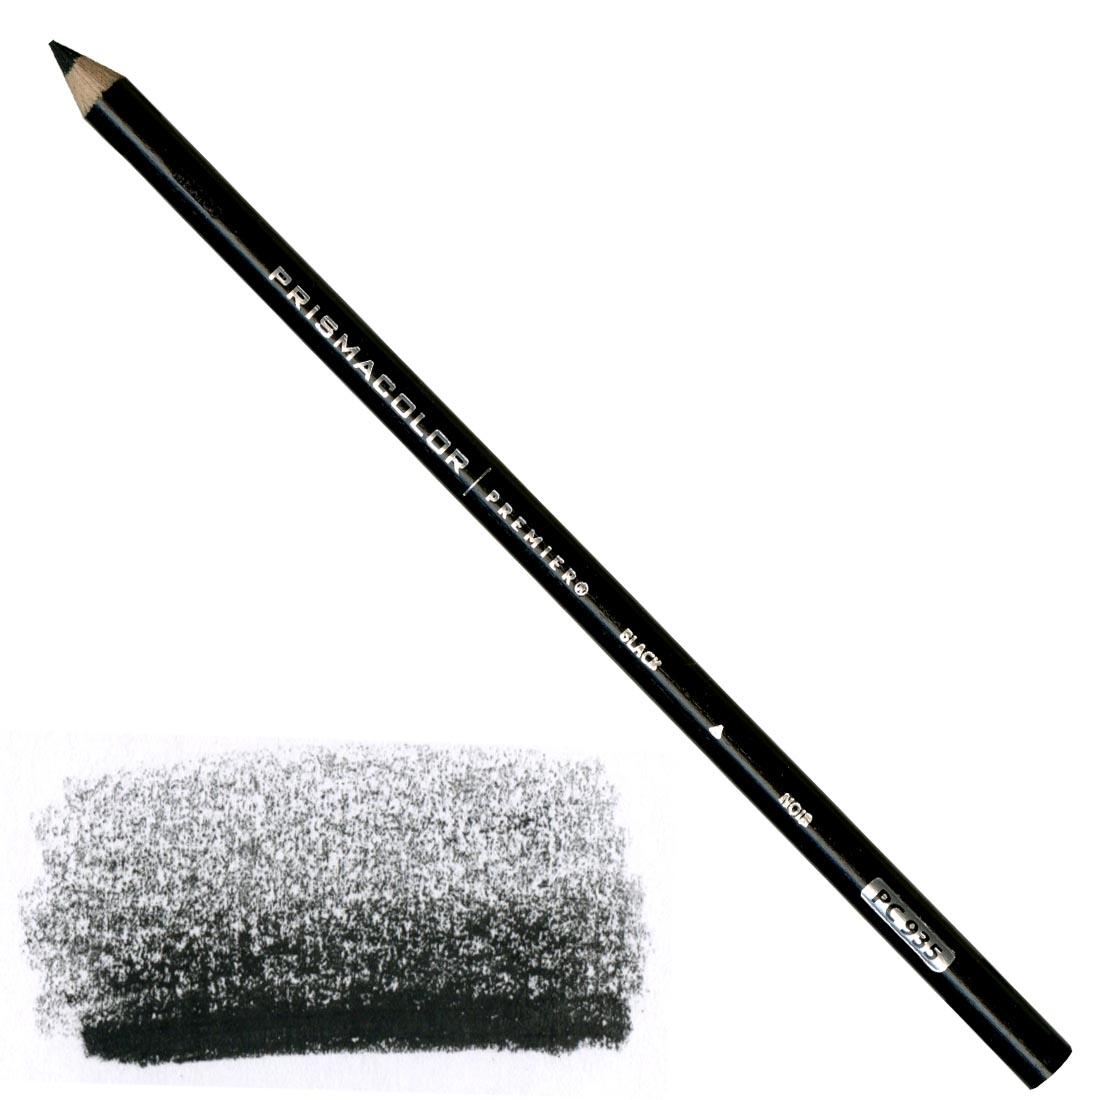 Black Prismacolor Premier Colored Pencil with a sample colored swatch